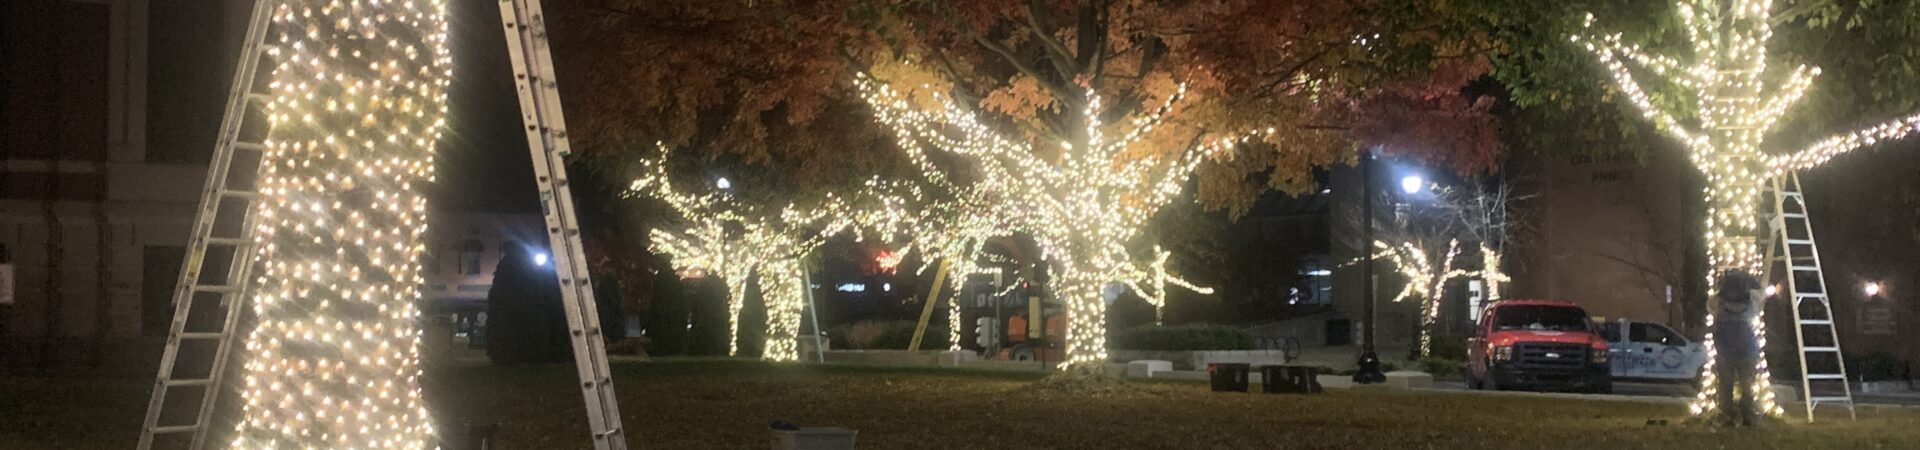 Commercial Christmas Light Installation in Indianapolis